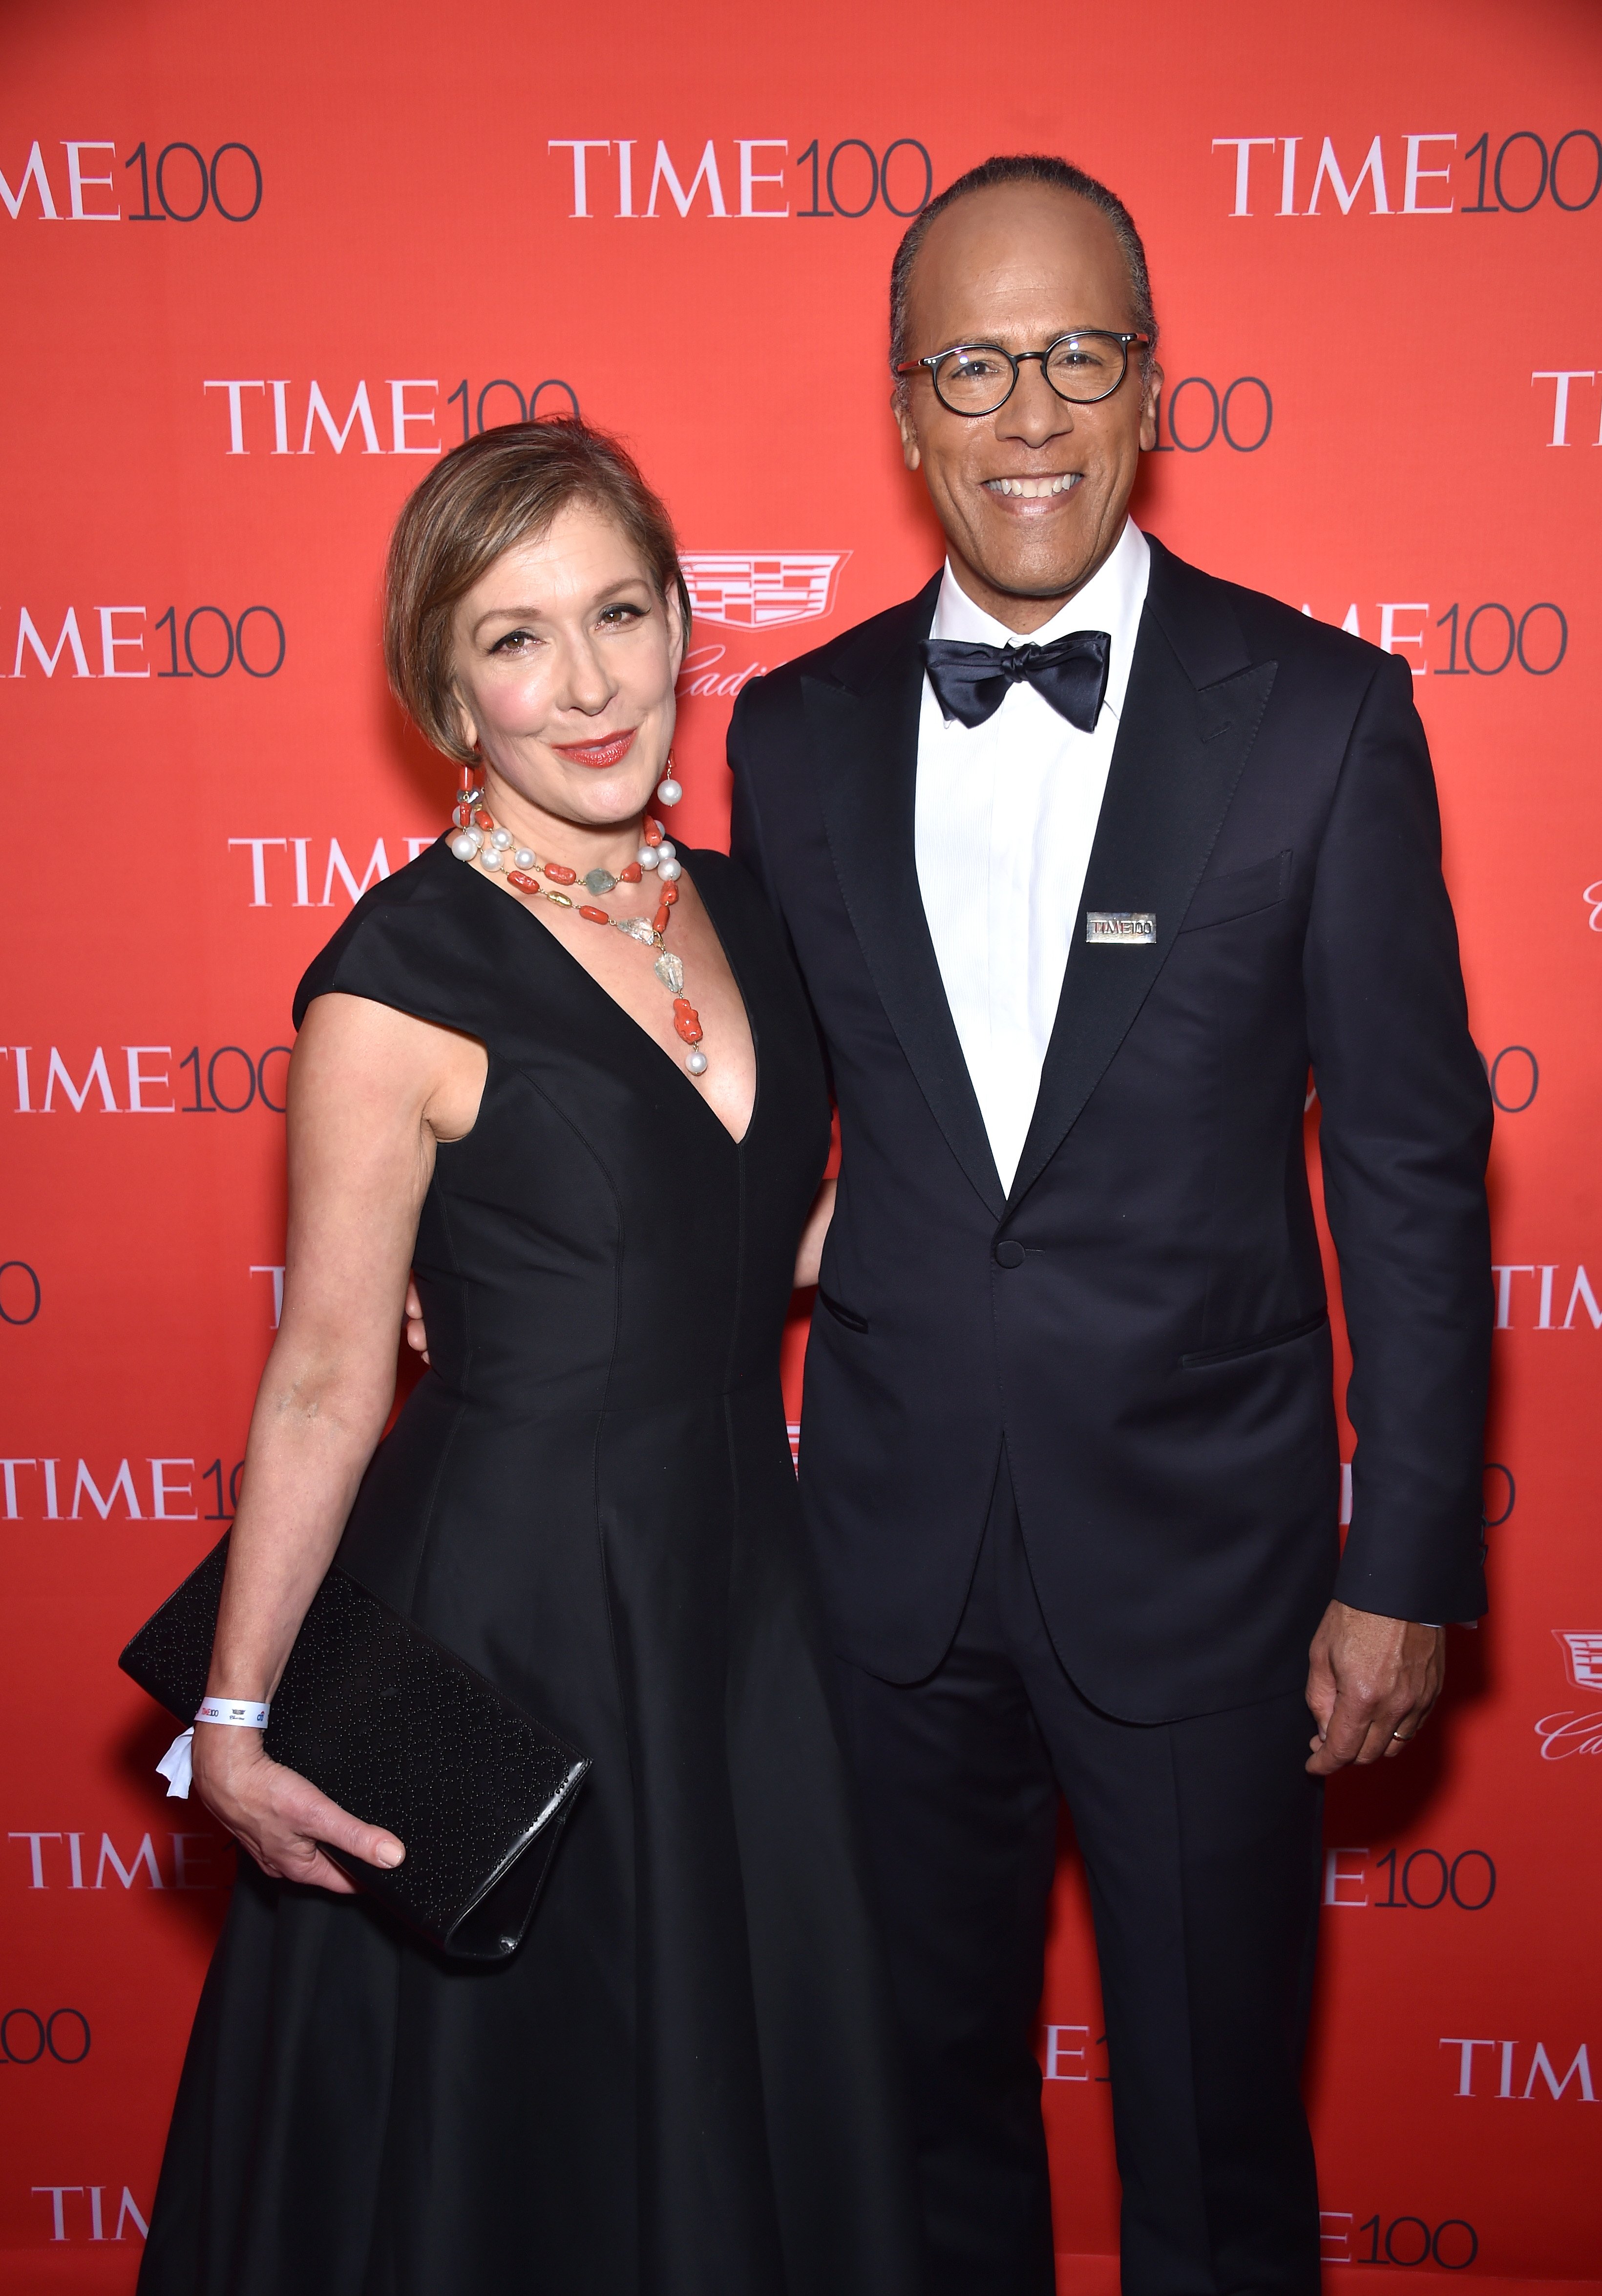 Carol Hagen and Lester Holt at the 2016 Time 100 Gala, Time's Most Influential People In The World on April 26, 2016, in New York City. | Source: Getty Images